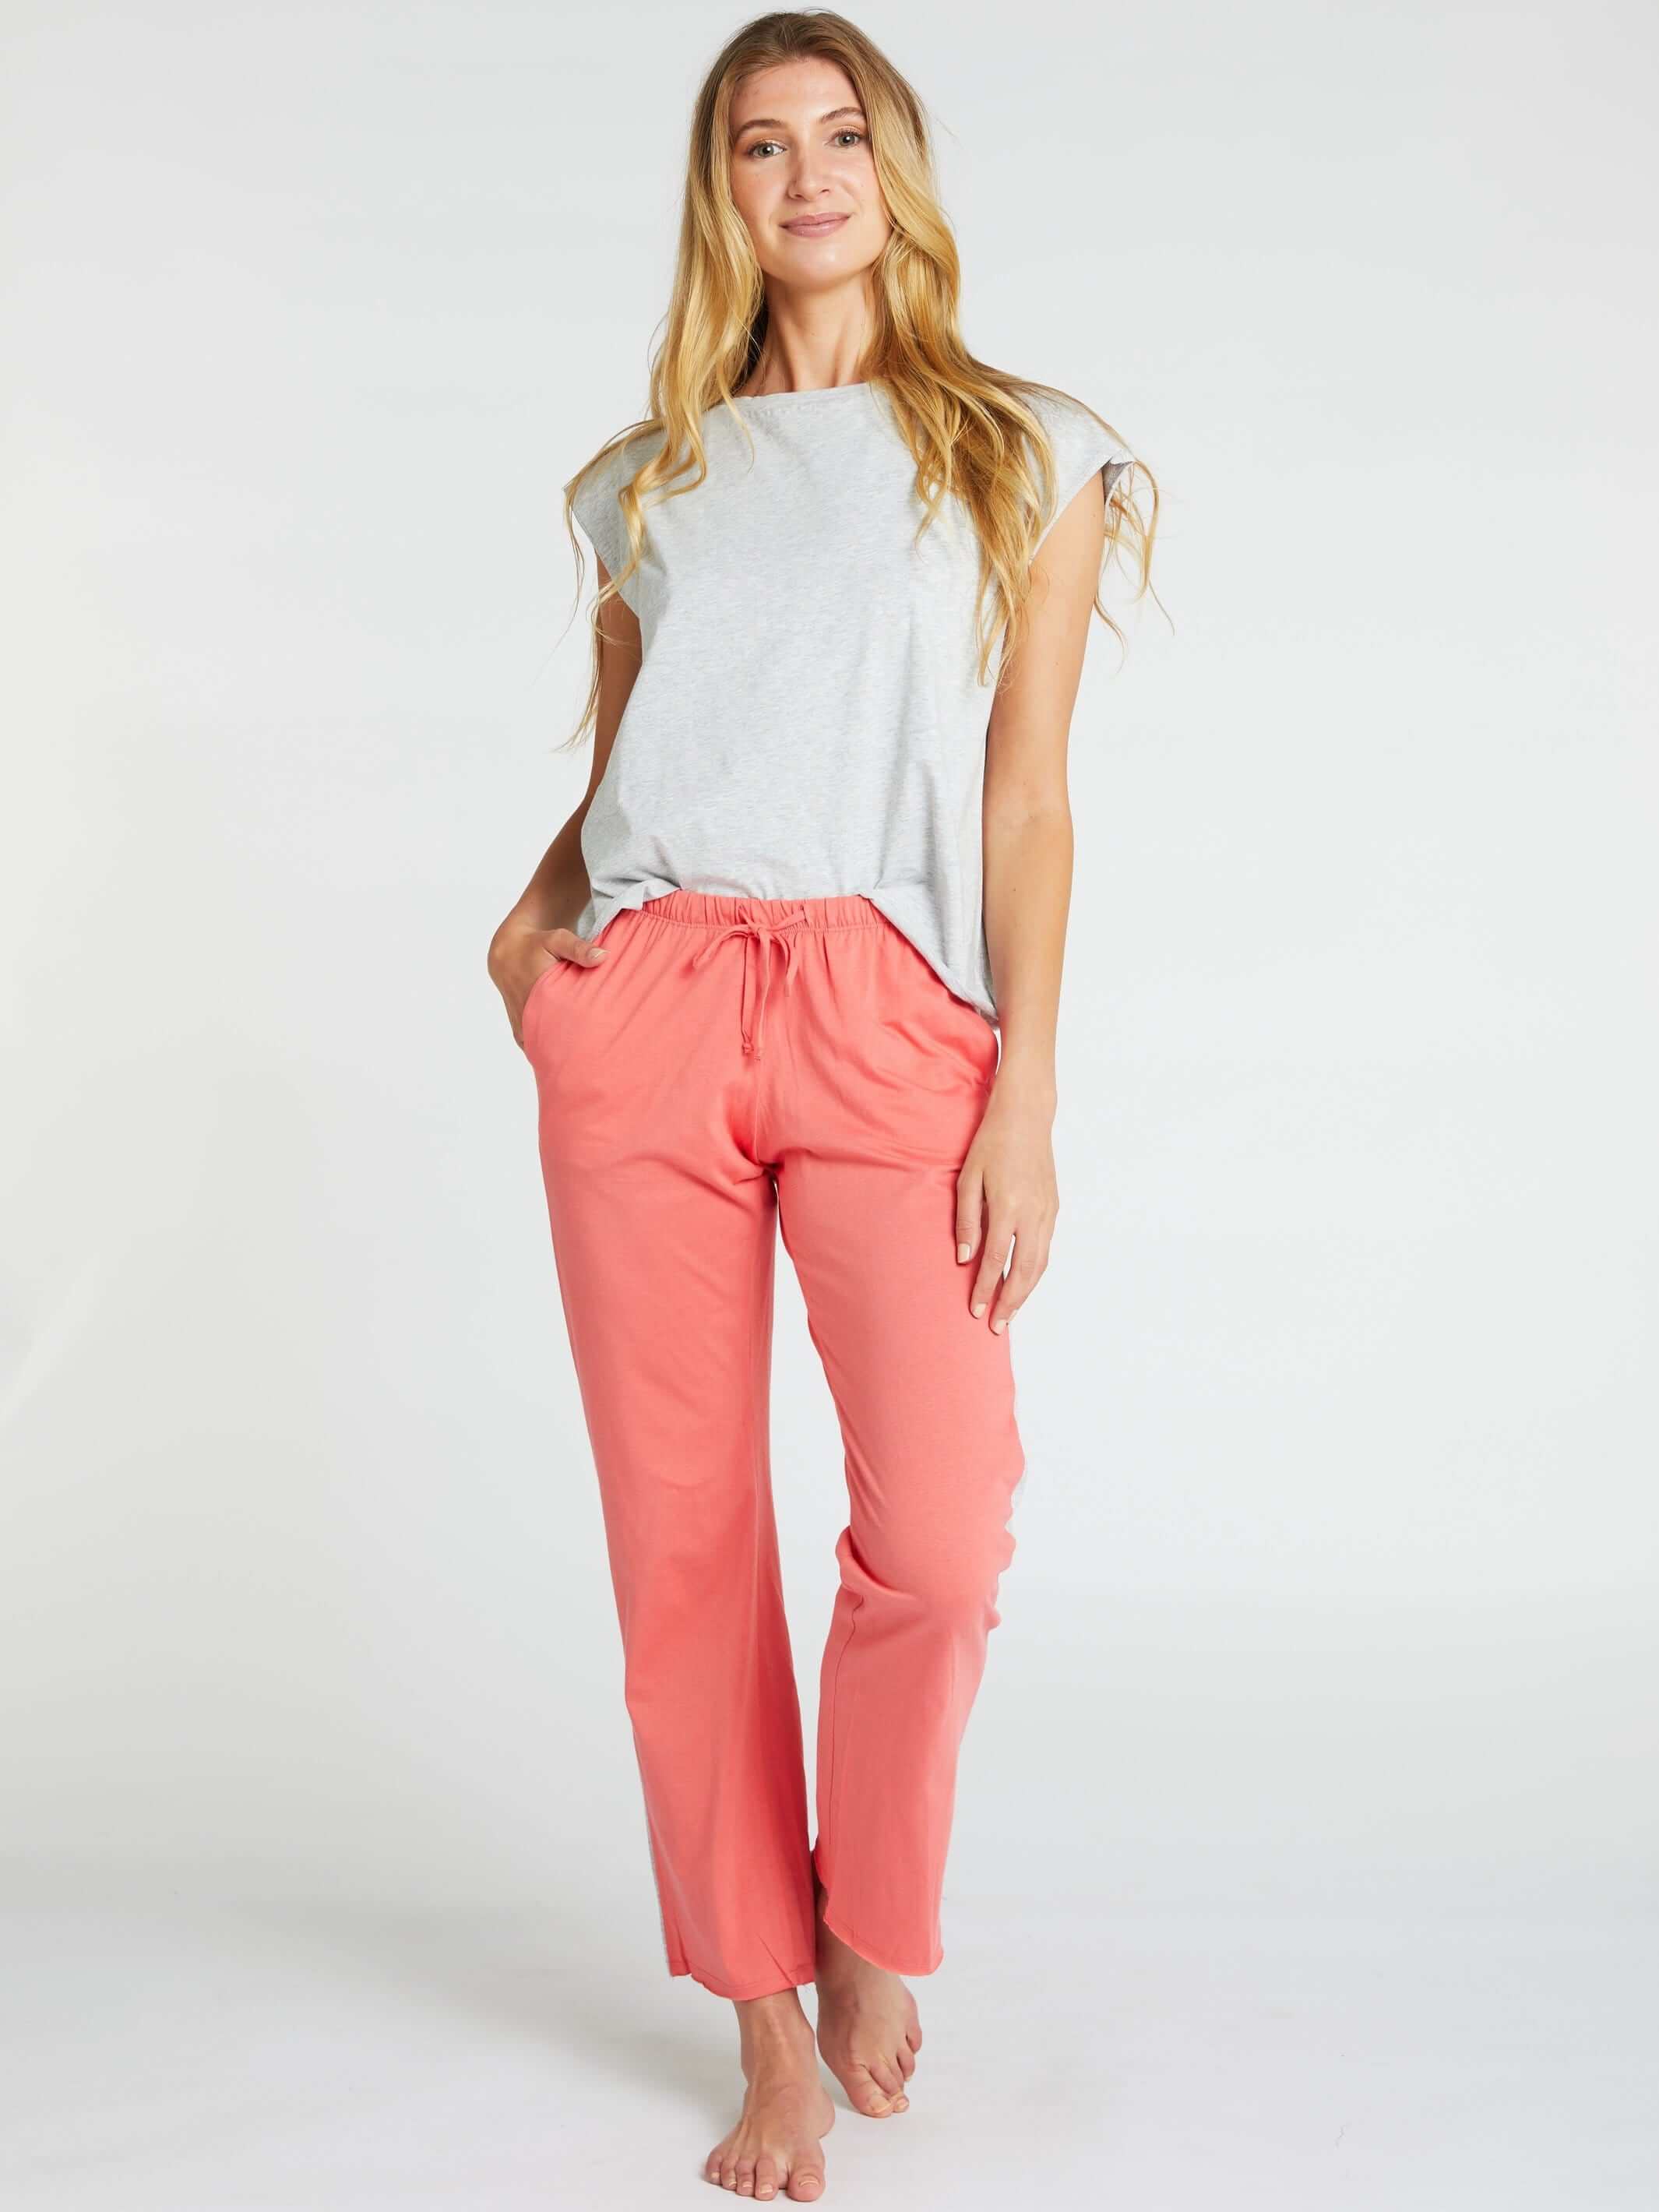 woman wearing grey marle womens organic cotton t shirt and womens long cotton pants in poppy colour